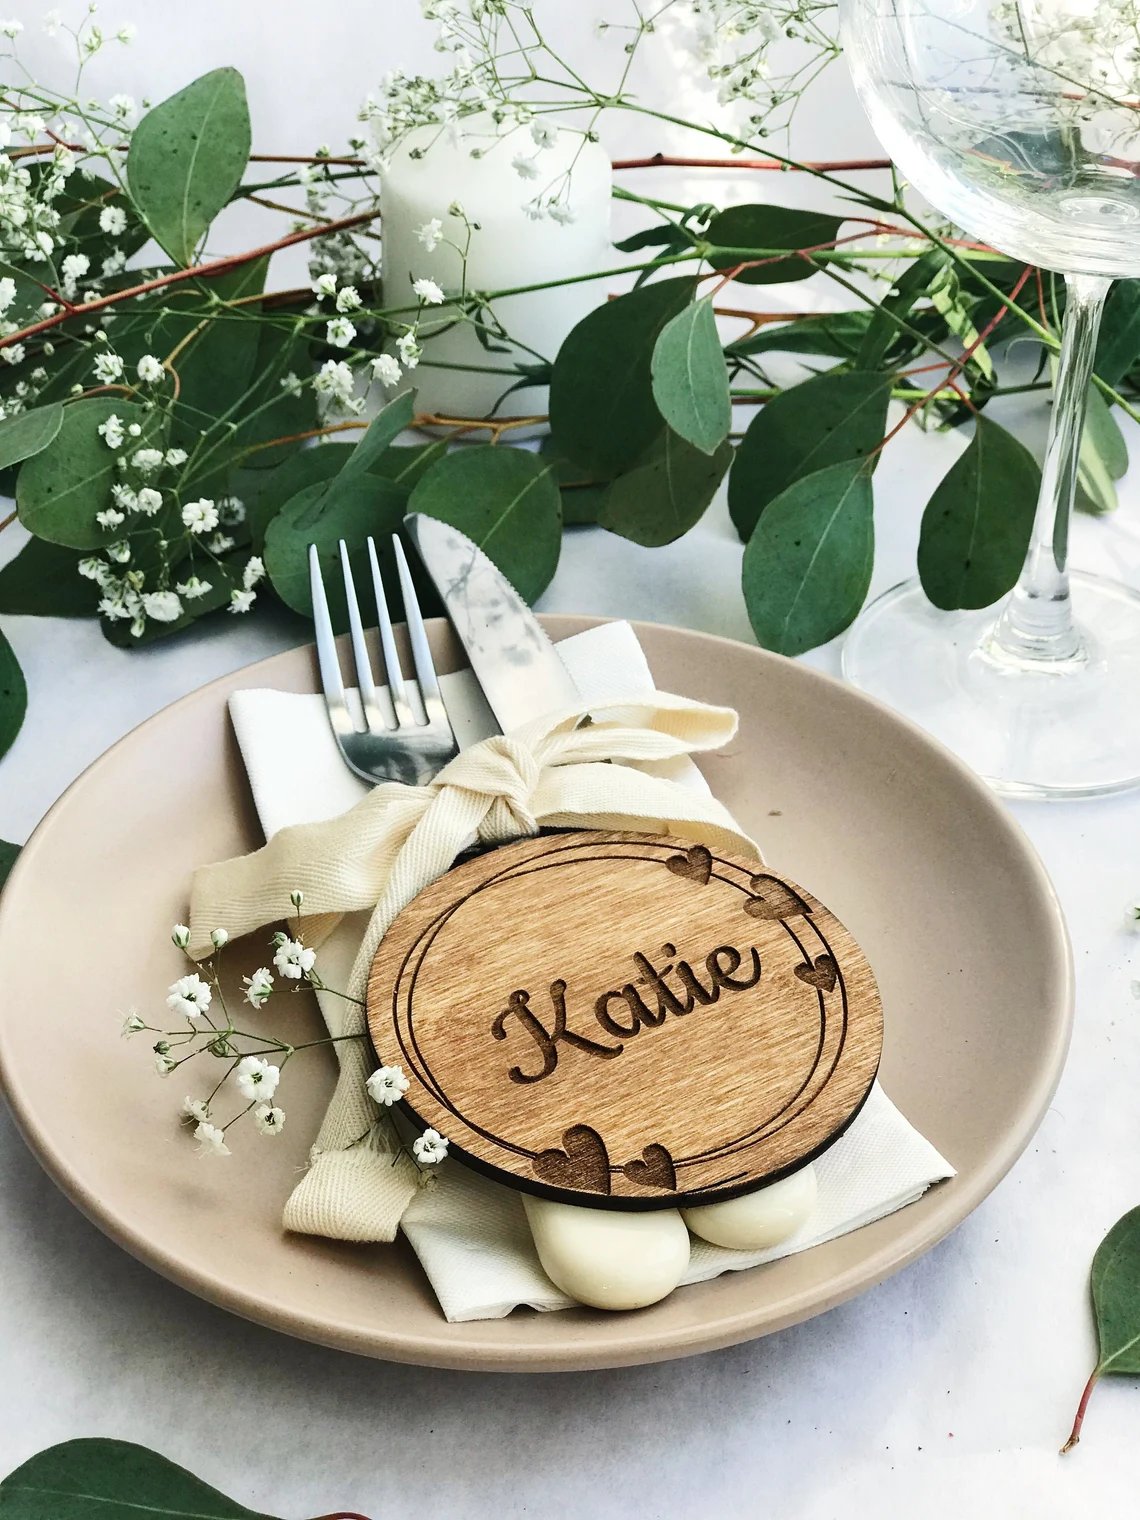 Personalized Name Wooden Coaster Place Card Favor